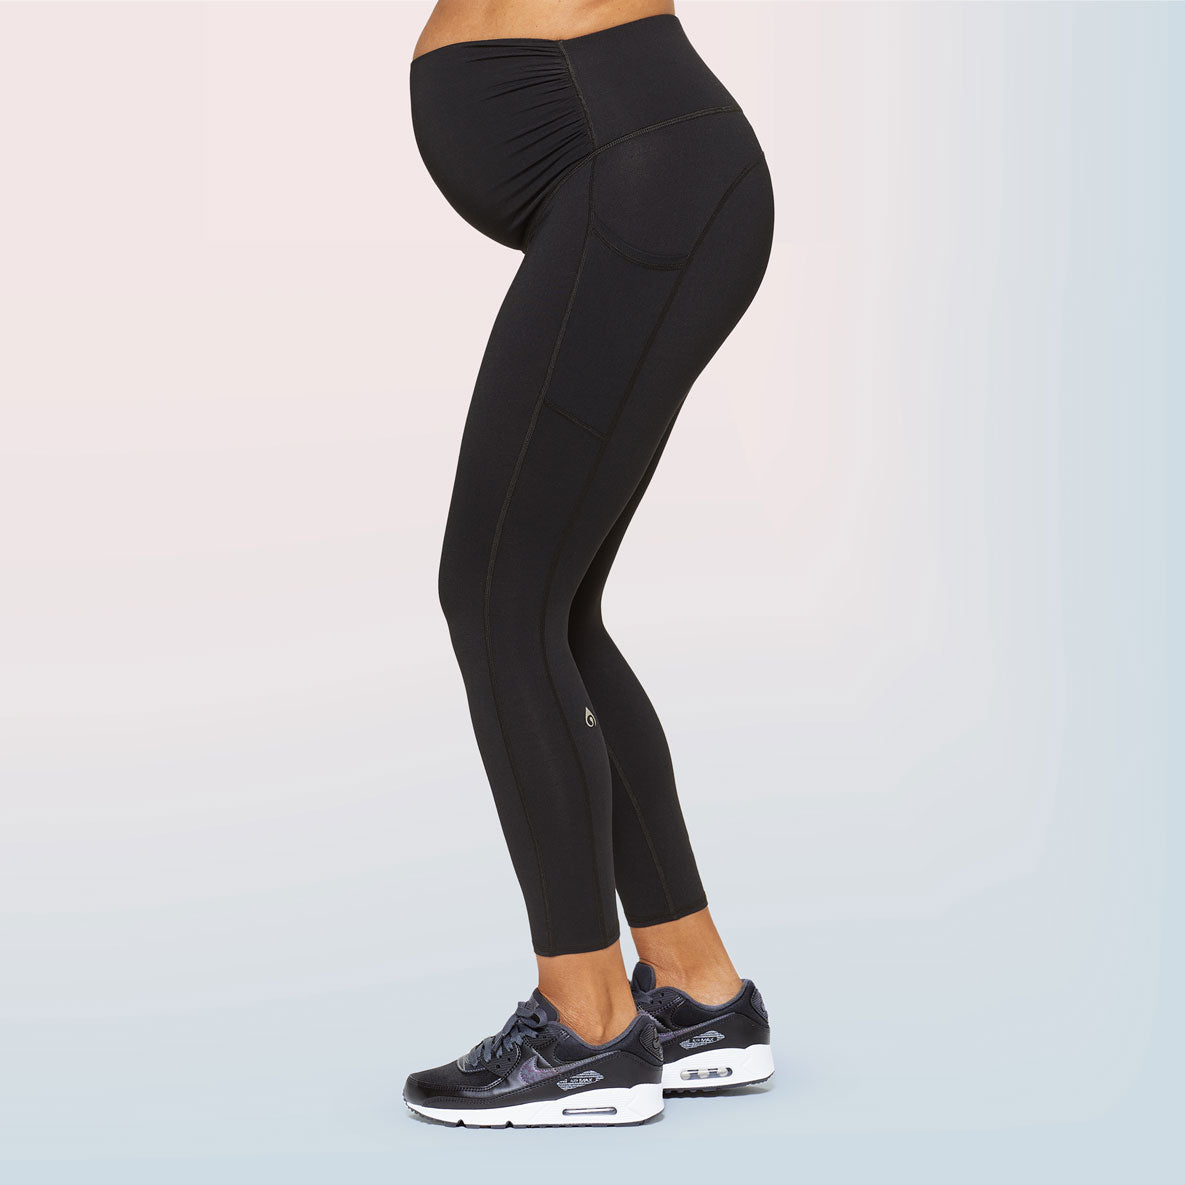 Seraphine Charcoal Post Maternity Shaping Leggings in Gray